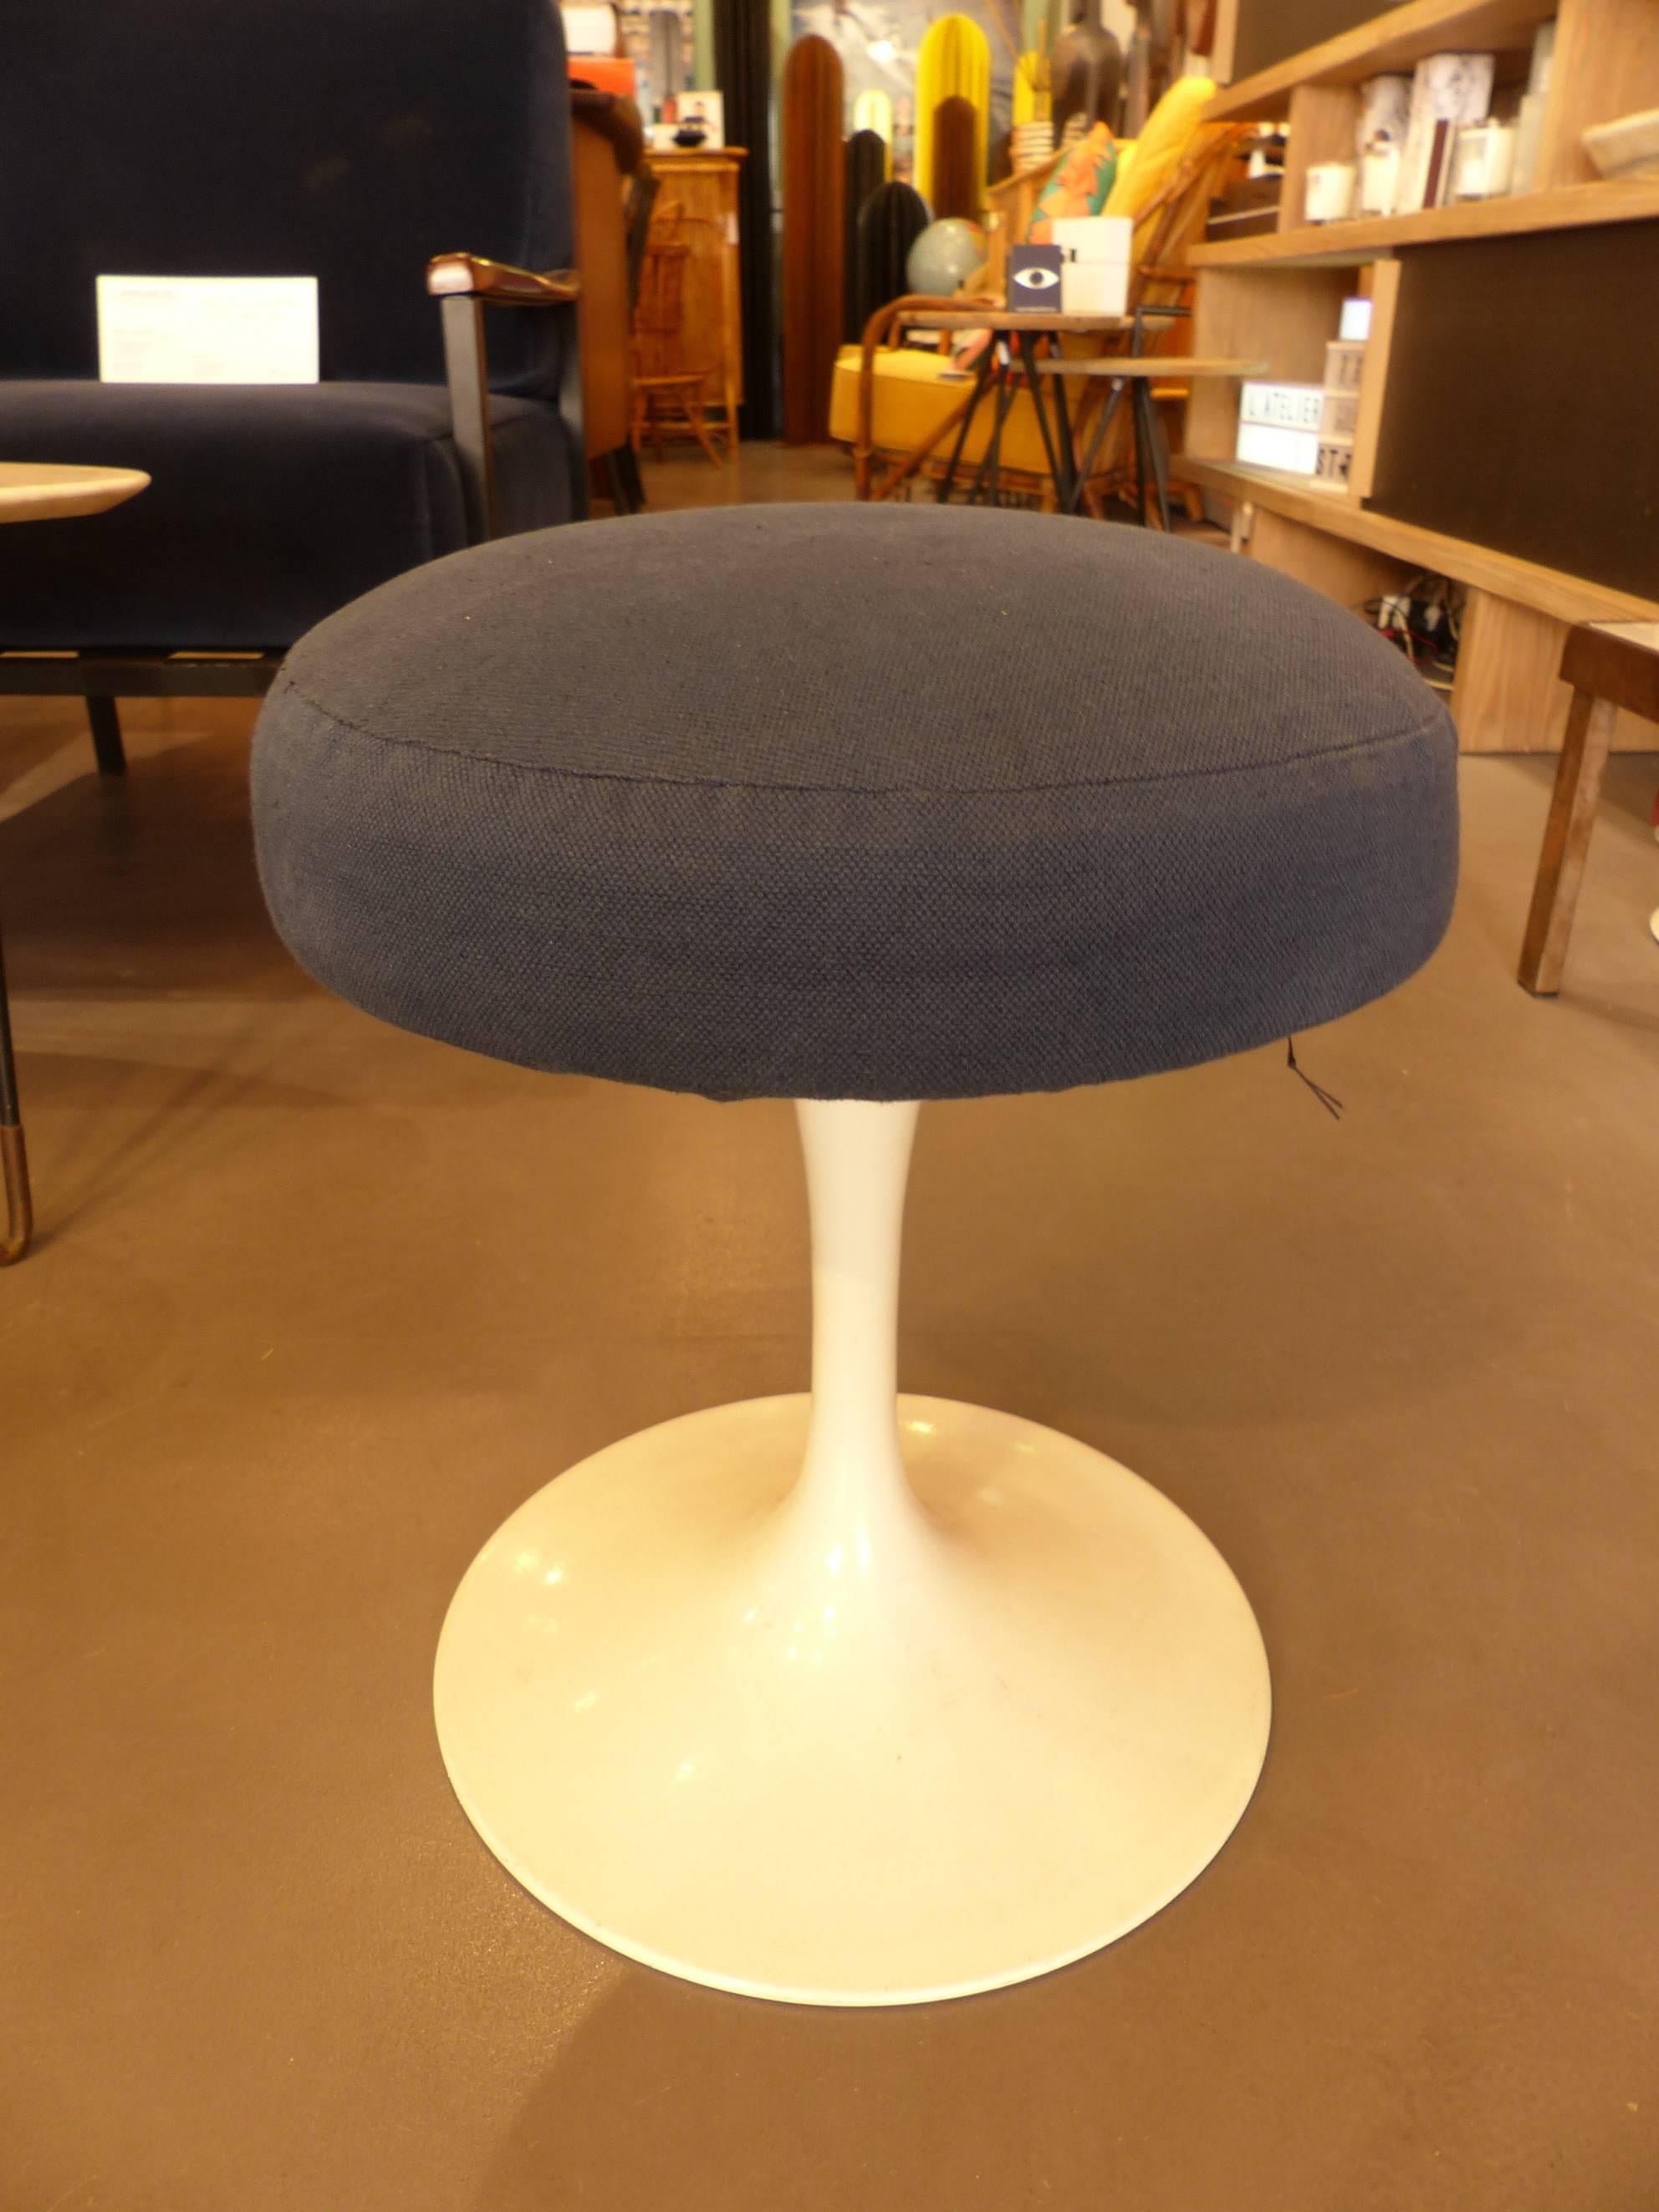 Beautiful Knoll stool with tulip foot by Eero Saarinen, circa 1960.
Excellent condition.